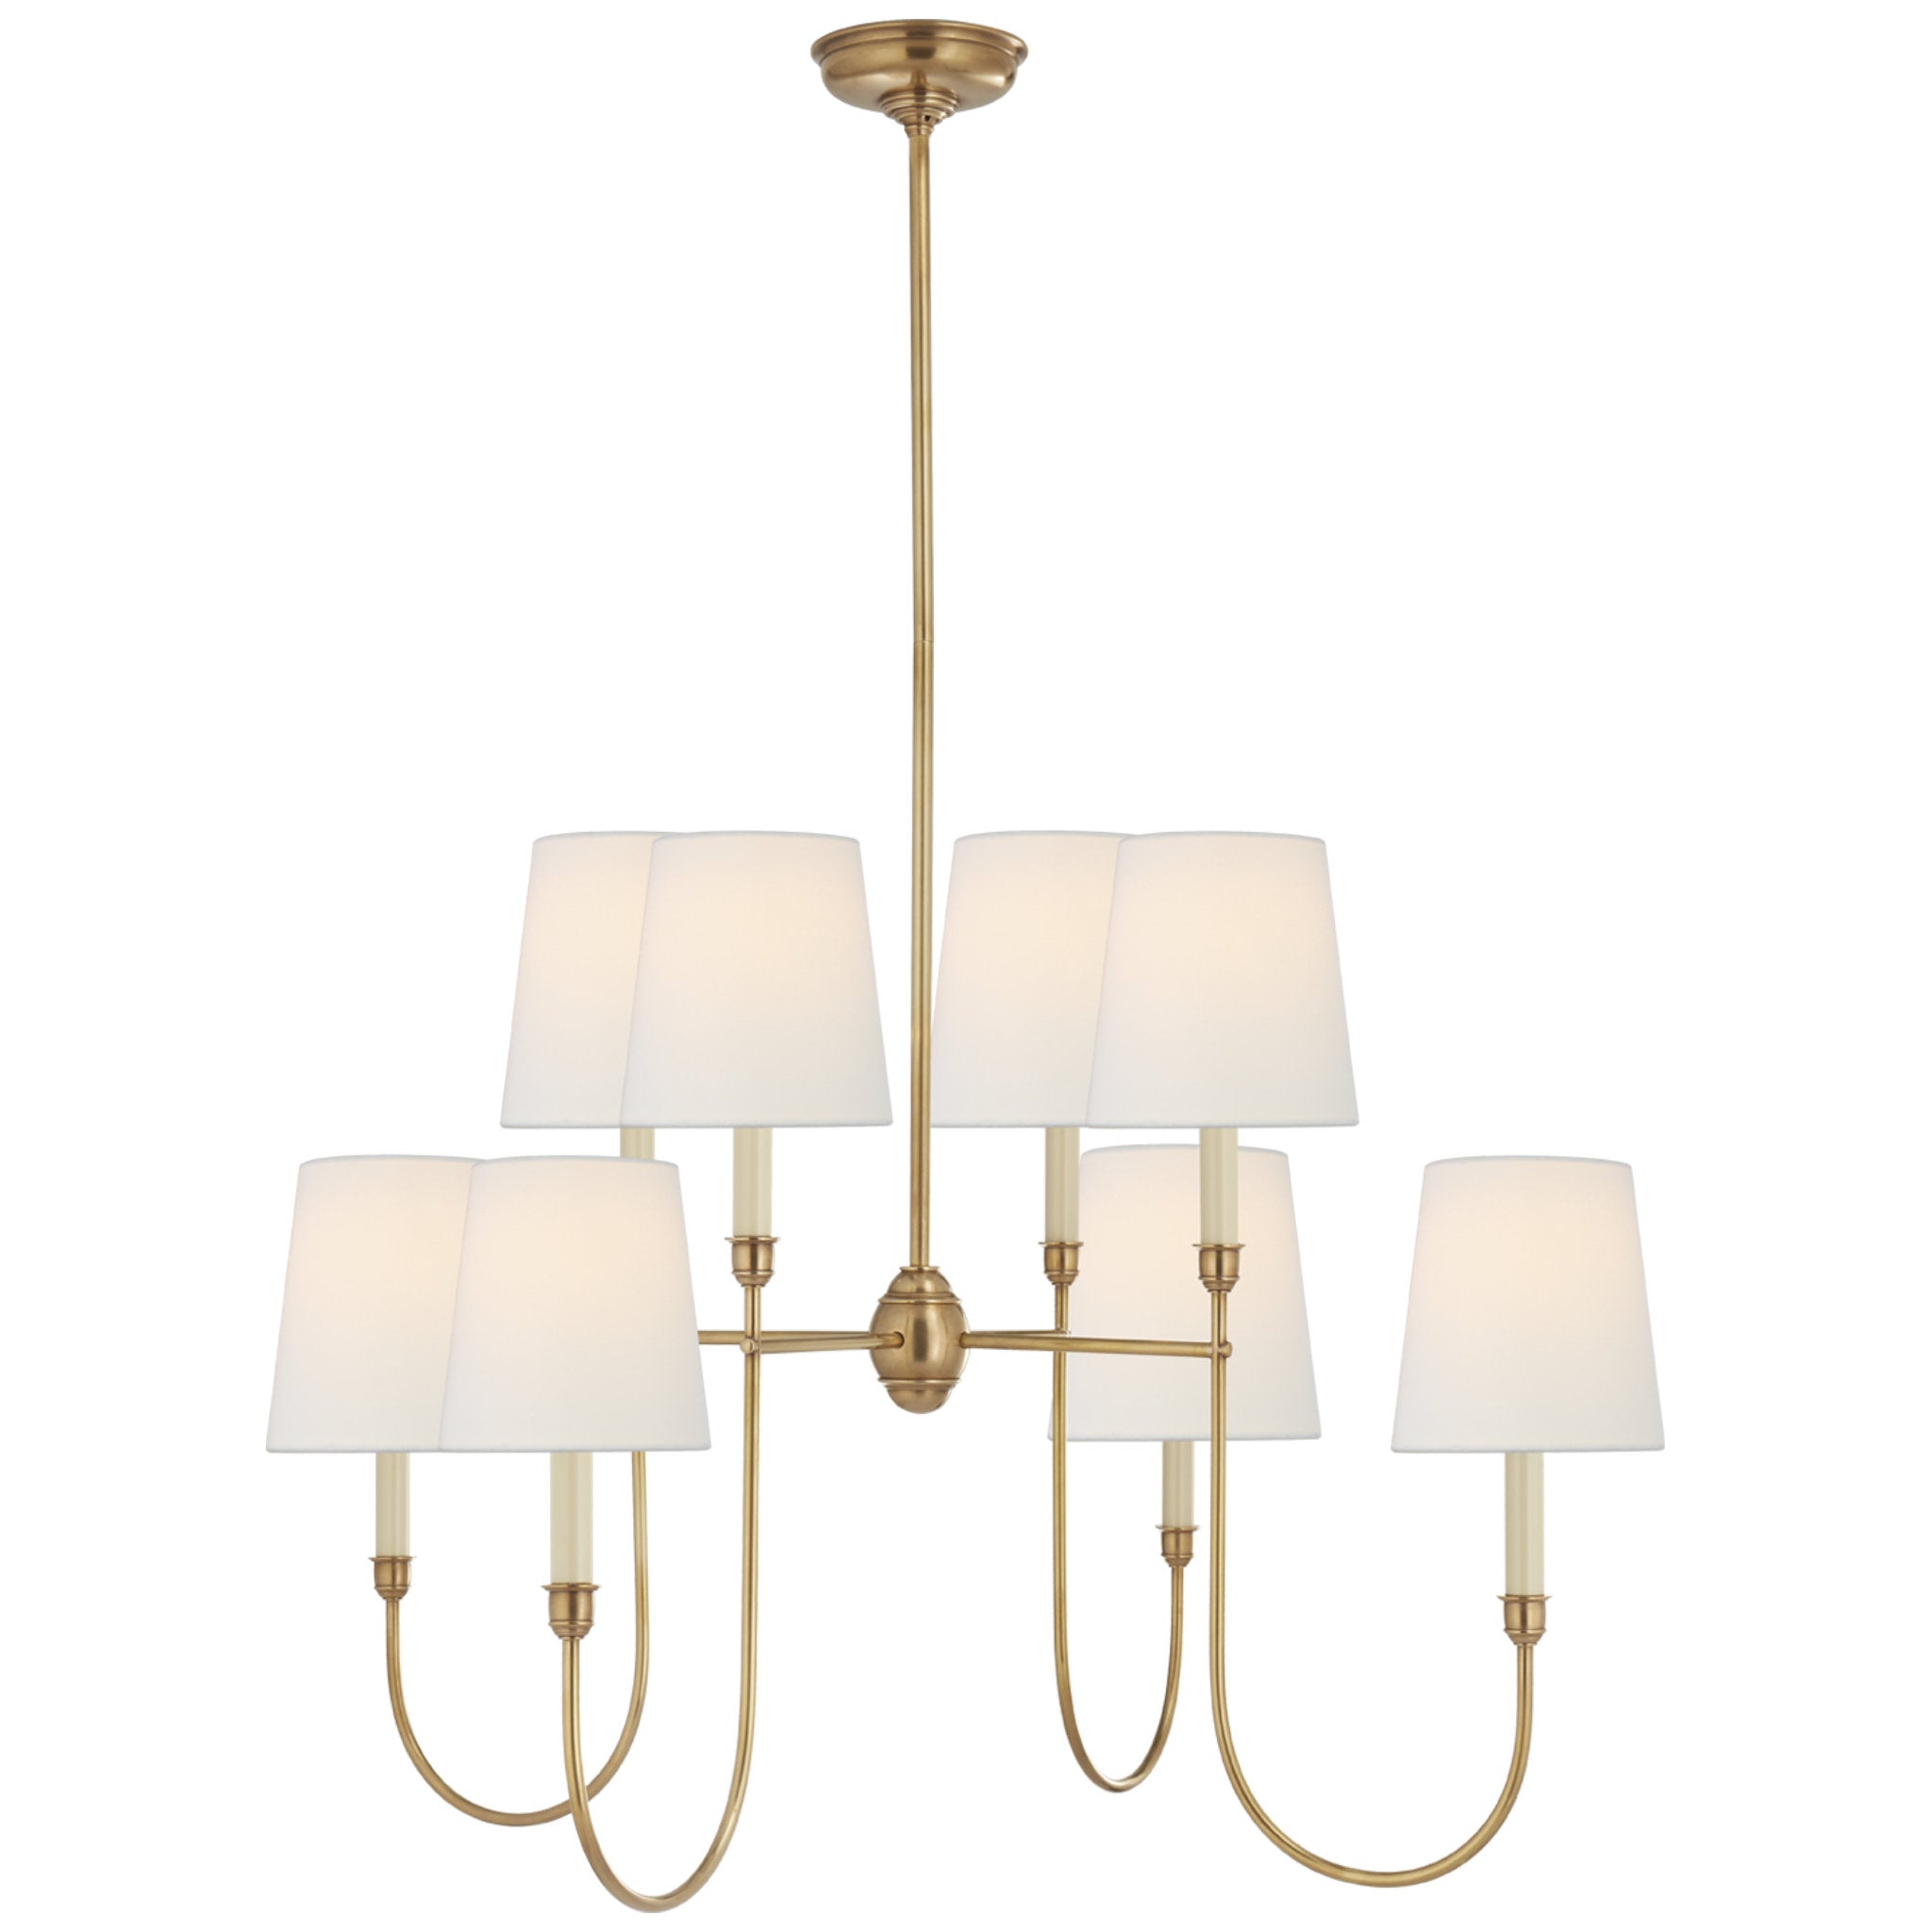 NW5041AMHAB by Visual Comfort - Lido Large Chandelier in Antique Mirror and  Hand-Rubbed Antique Brass